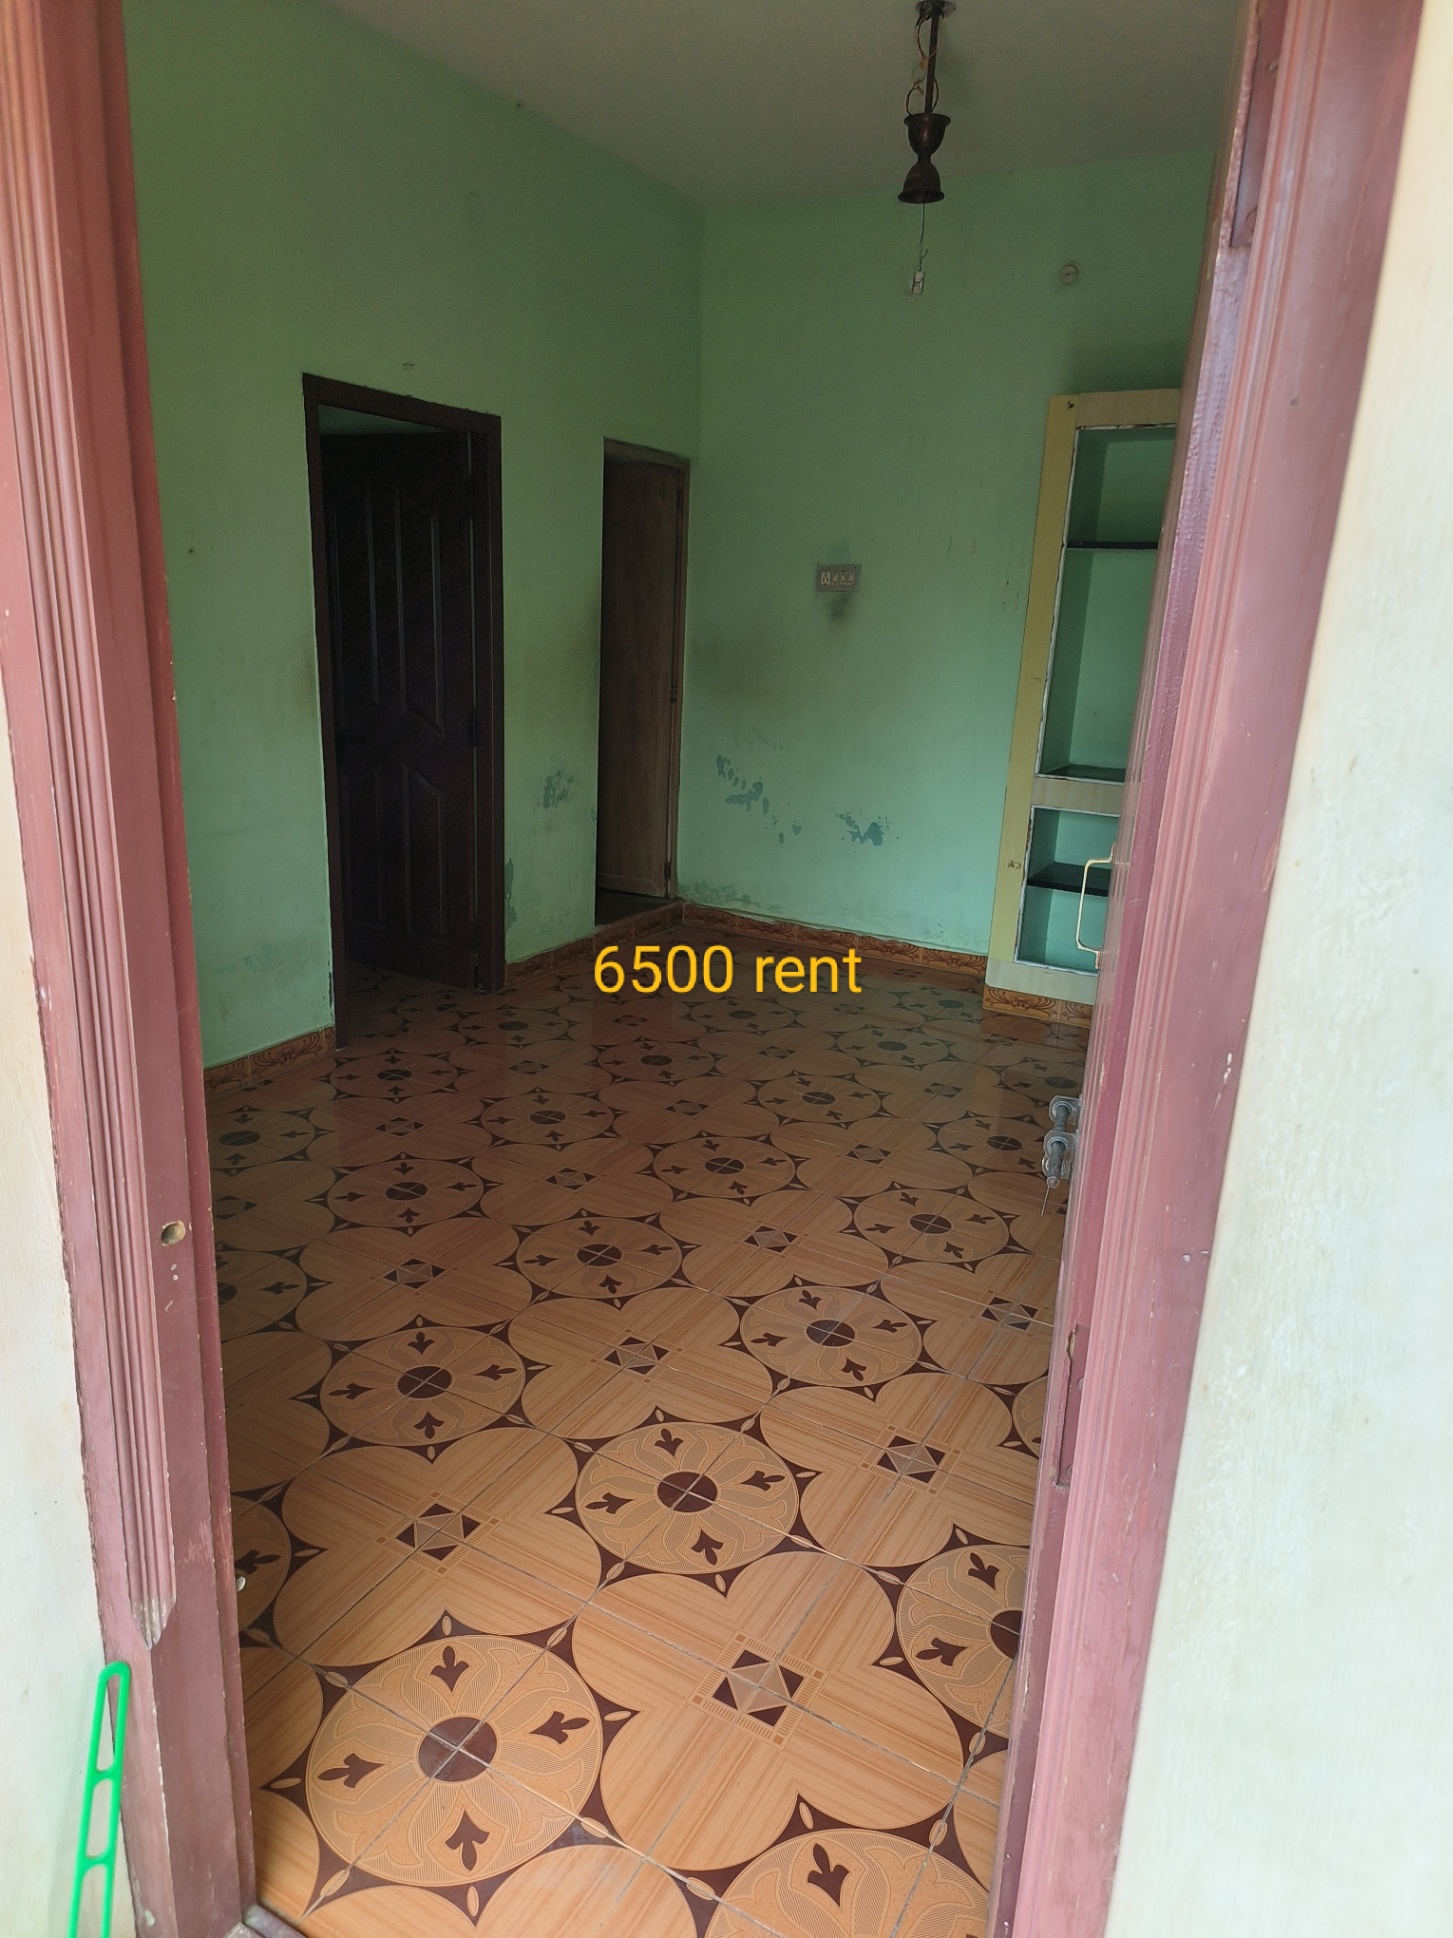 0 Bed/ 1 Bath Rent House/ Bungalow/ Villa; 2,000 sq. ft. carpet area, Semi Furnished for rent @Trichy Airport wireless road 